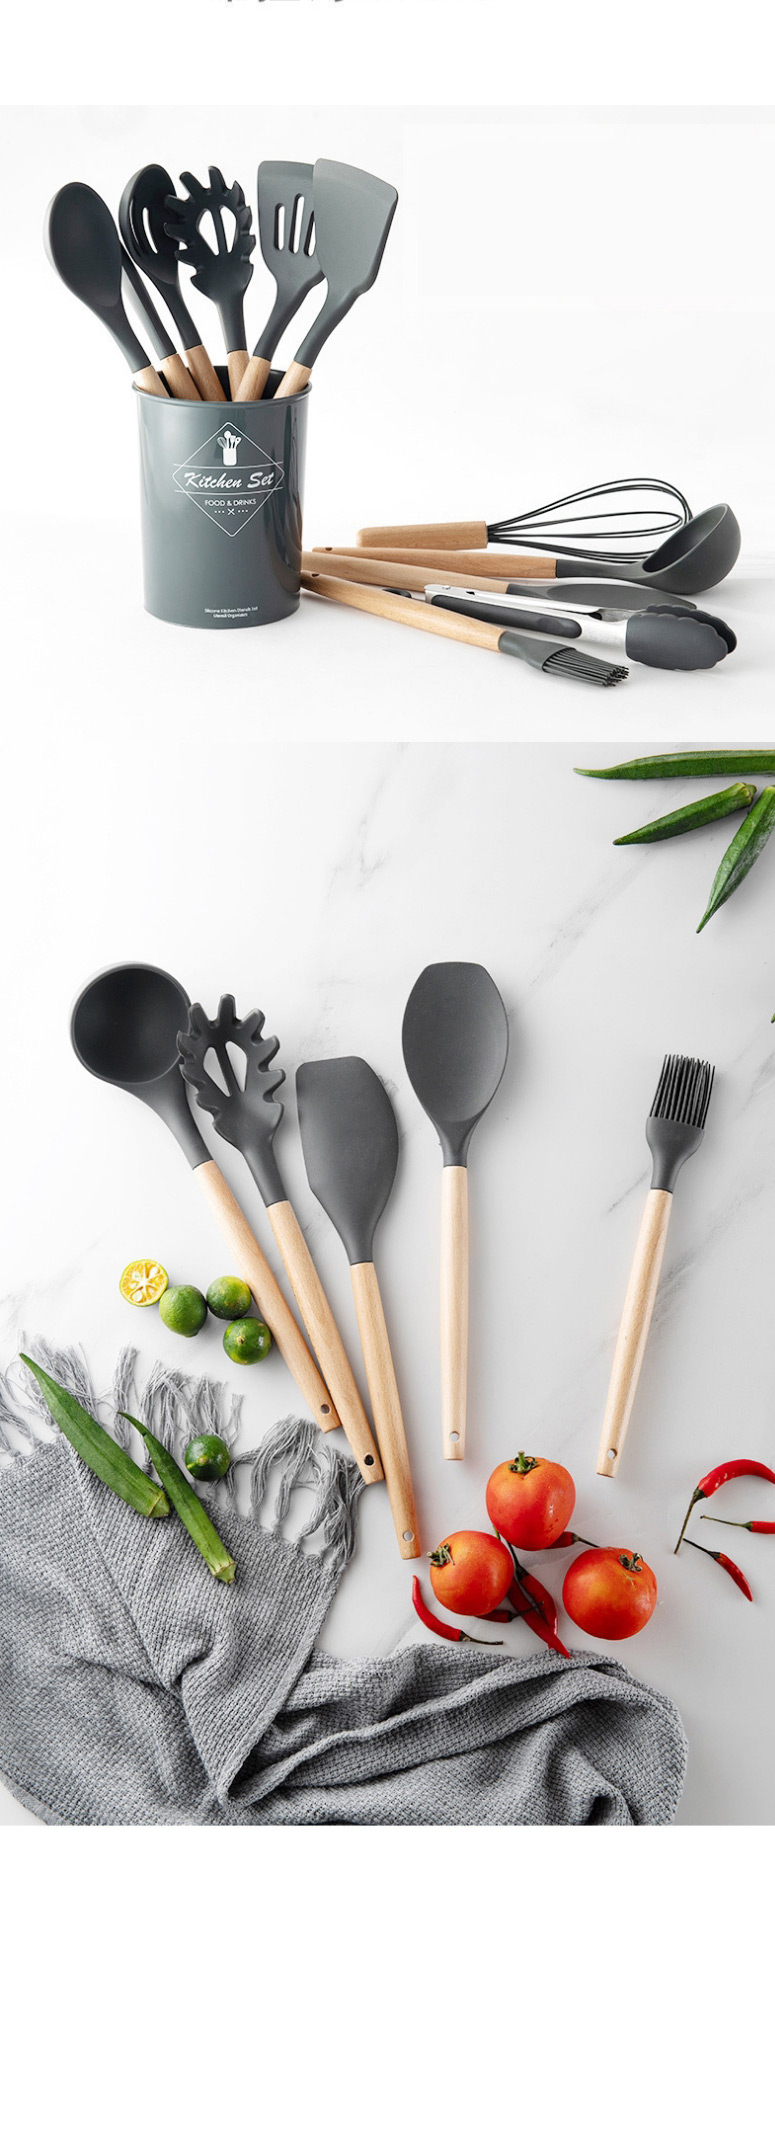 Fashion Soup Spoon Wood Handle Silicone Nonstick Cooking Utensils Baking Set,Kitchen